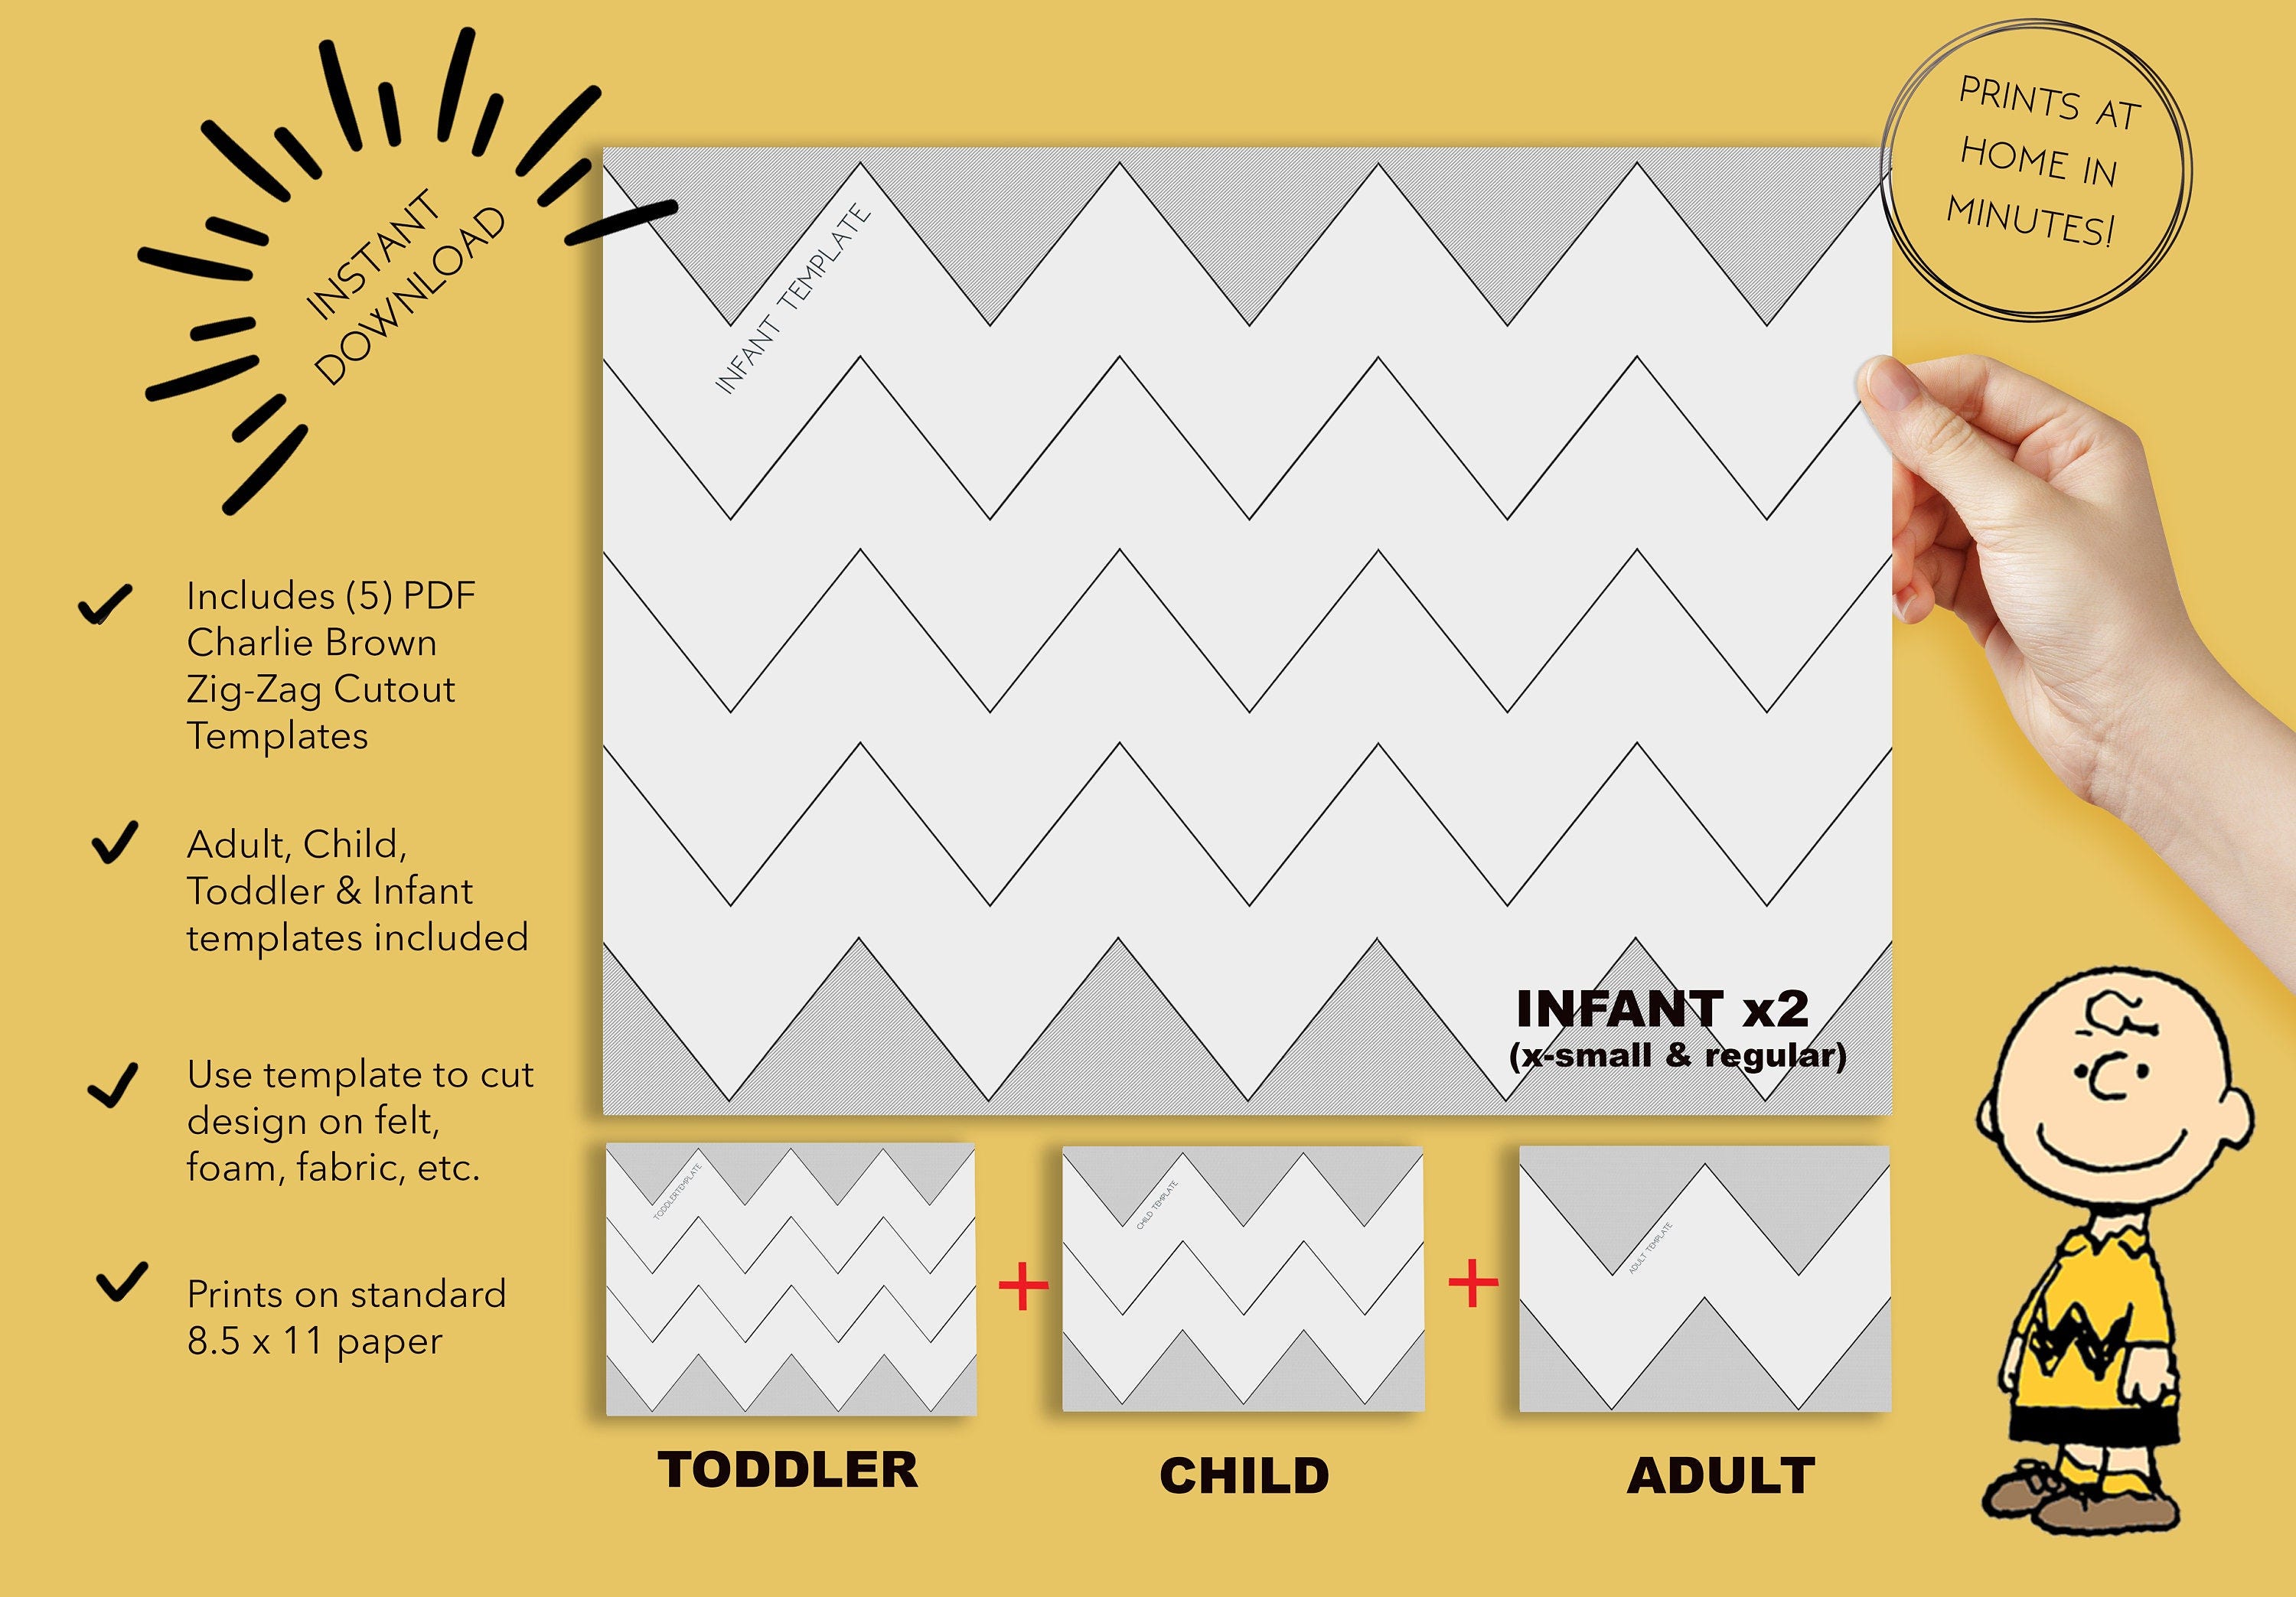 Printable Charlie Brown Zig-Zag Pattern for Halloween Costumes - Instant Download - Charlie Brown